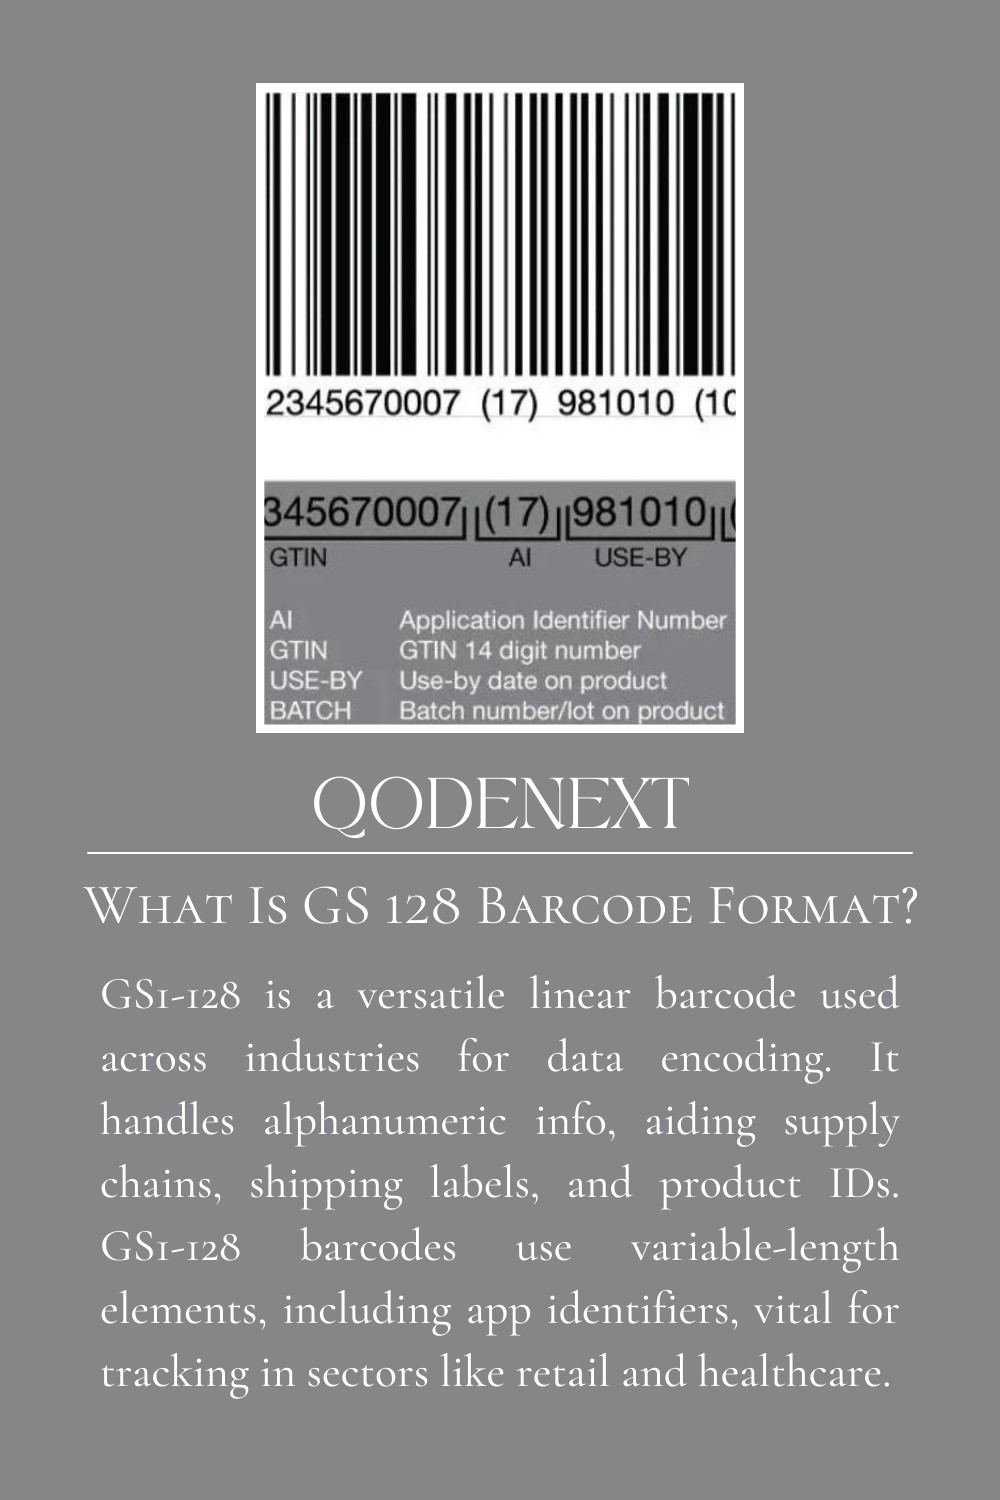 About GS128 Barcode Format